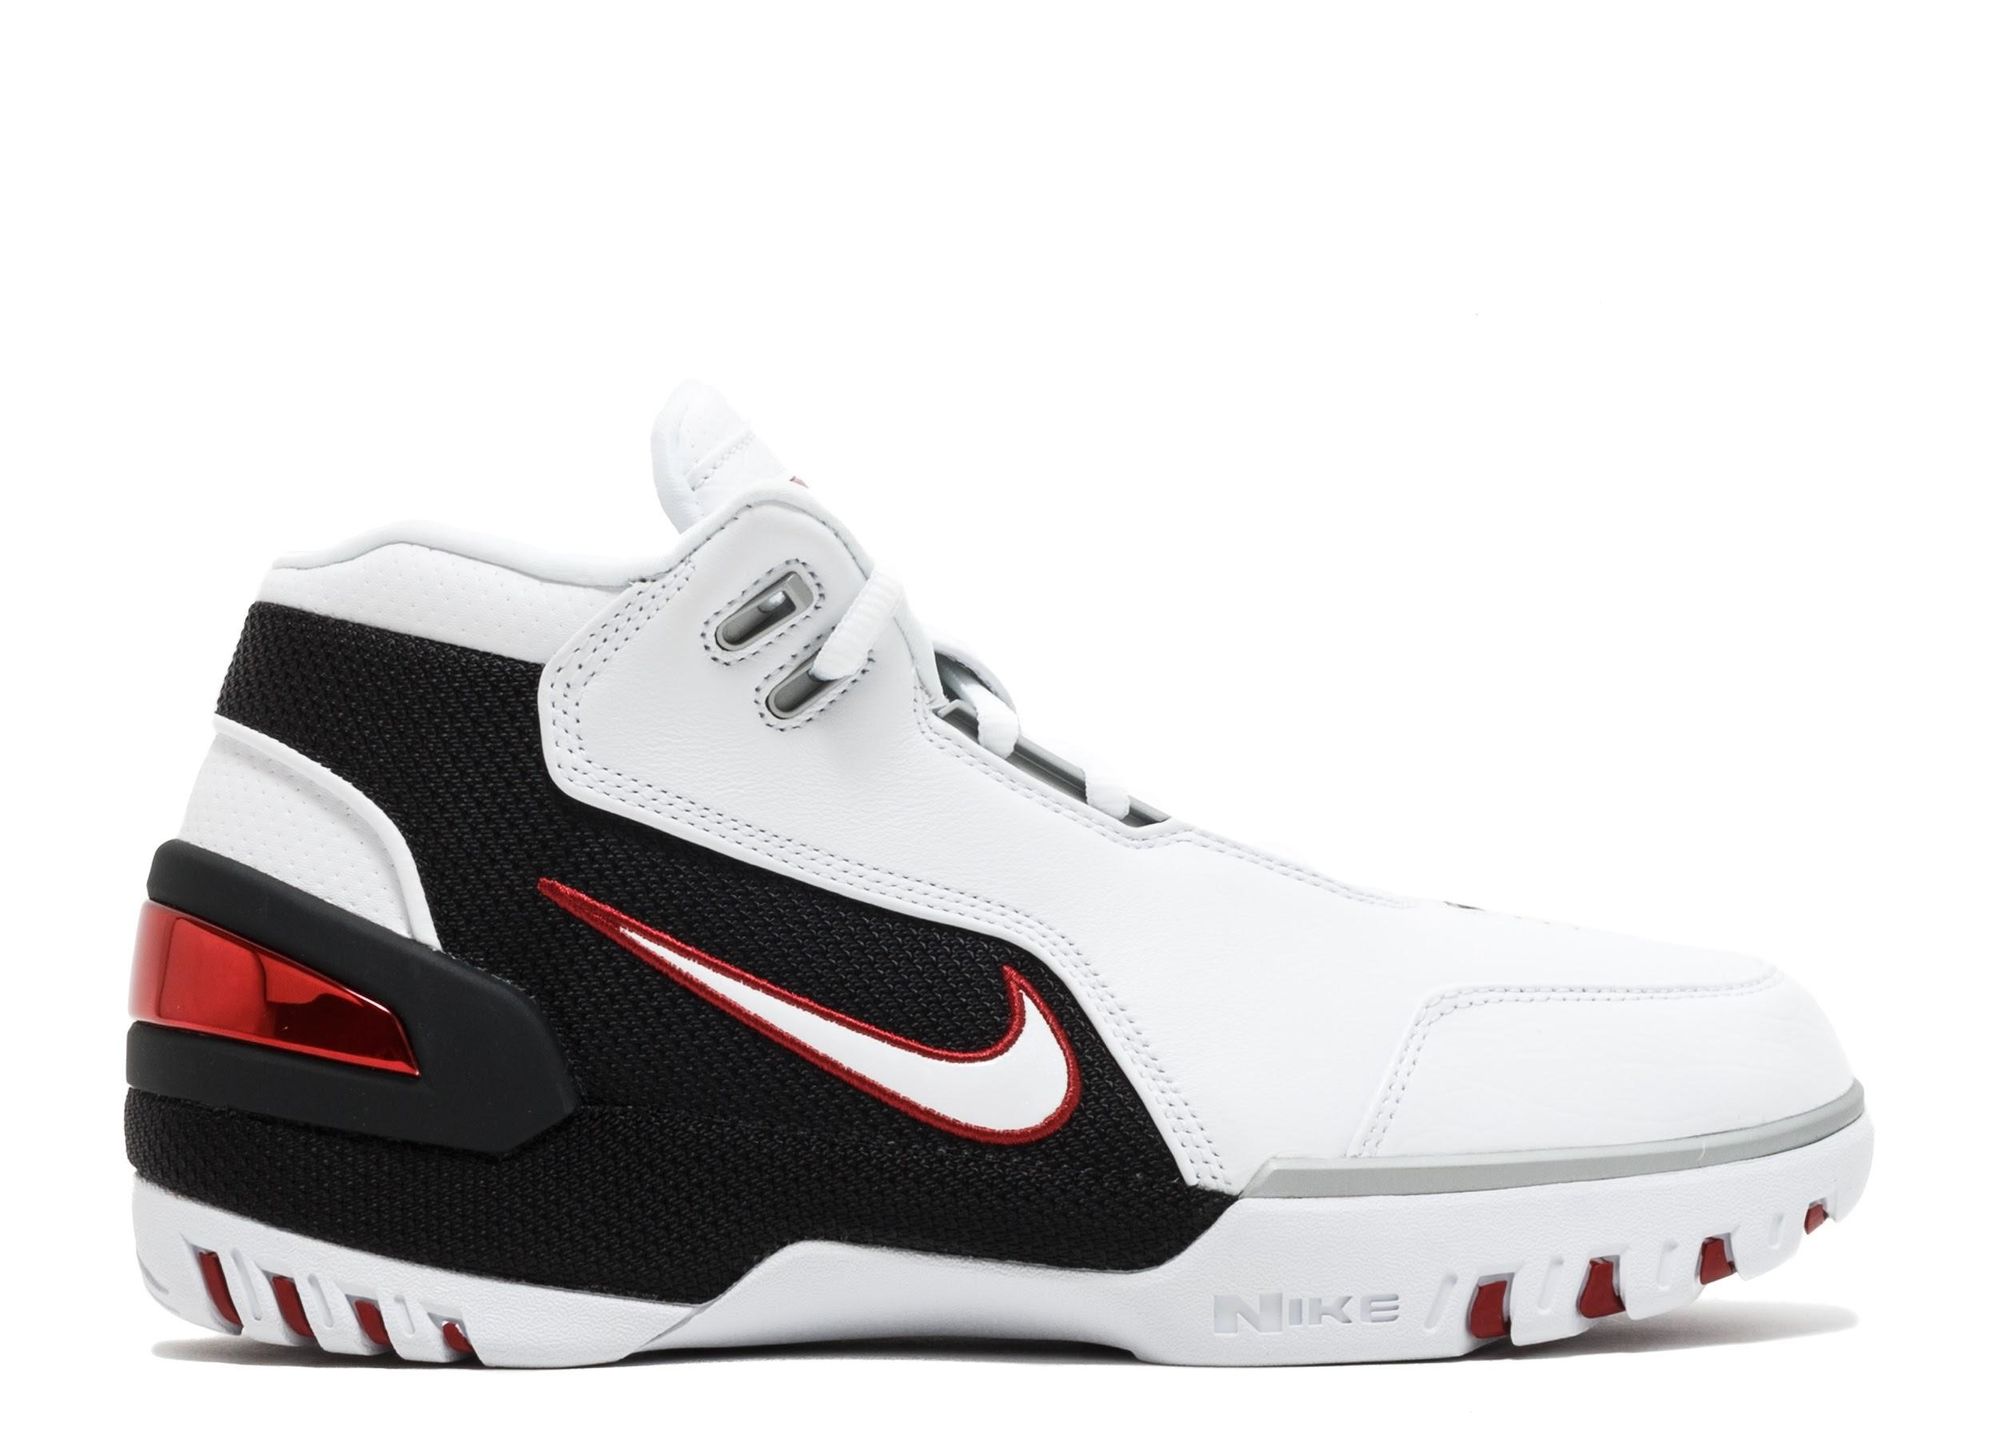 the best basketball shoes to play in